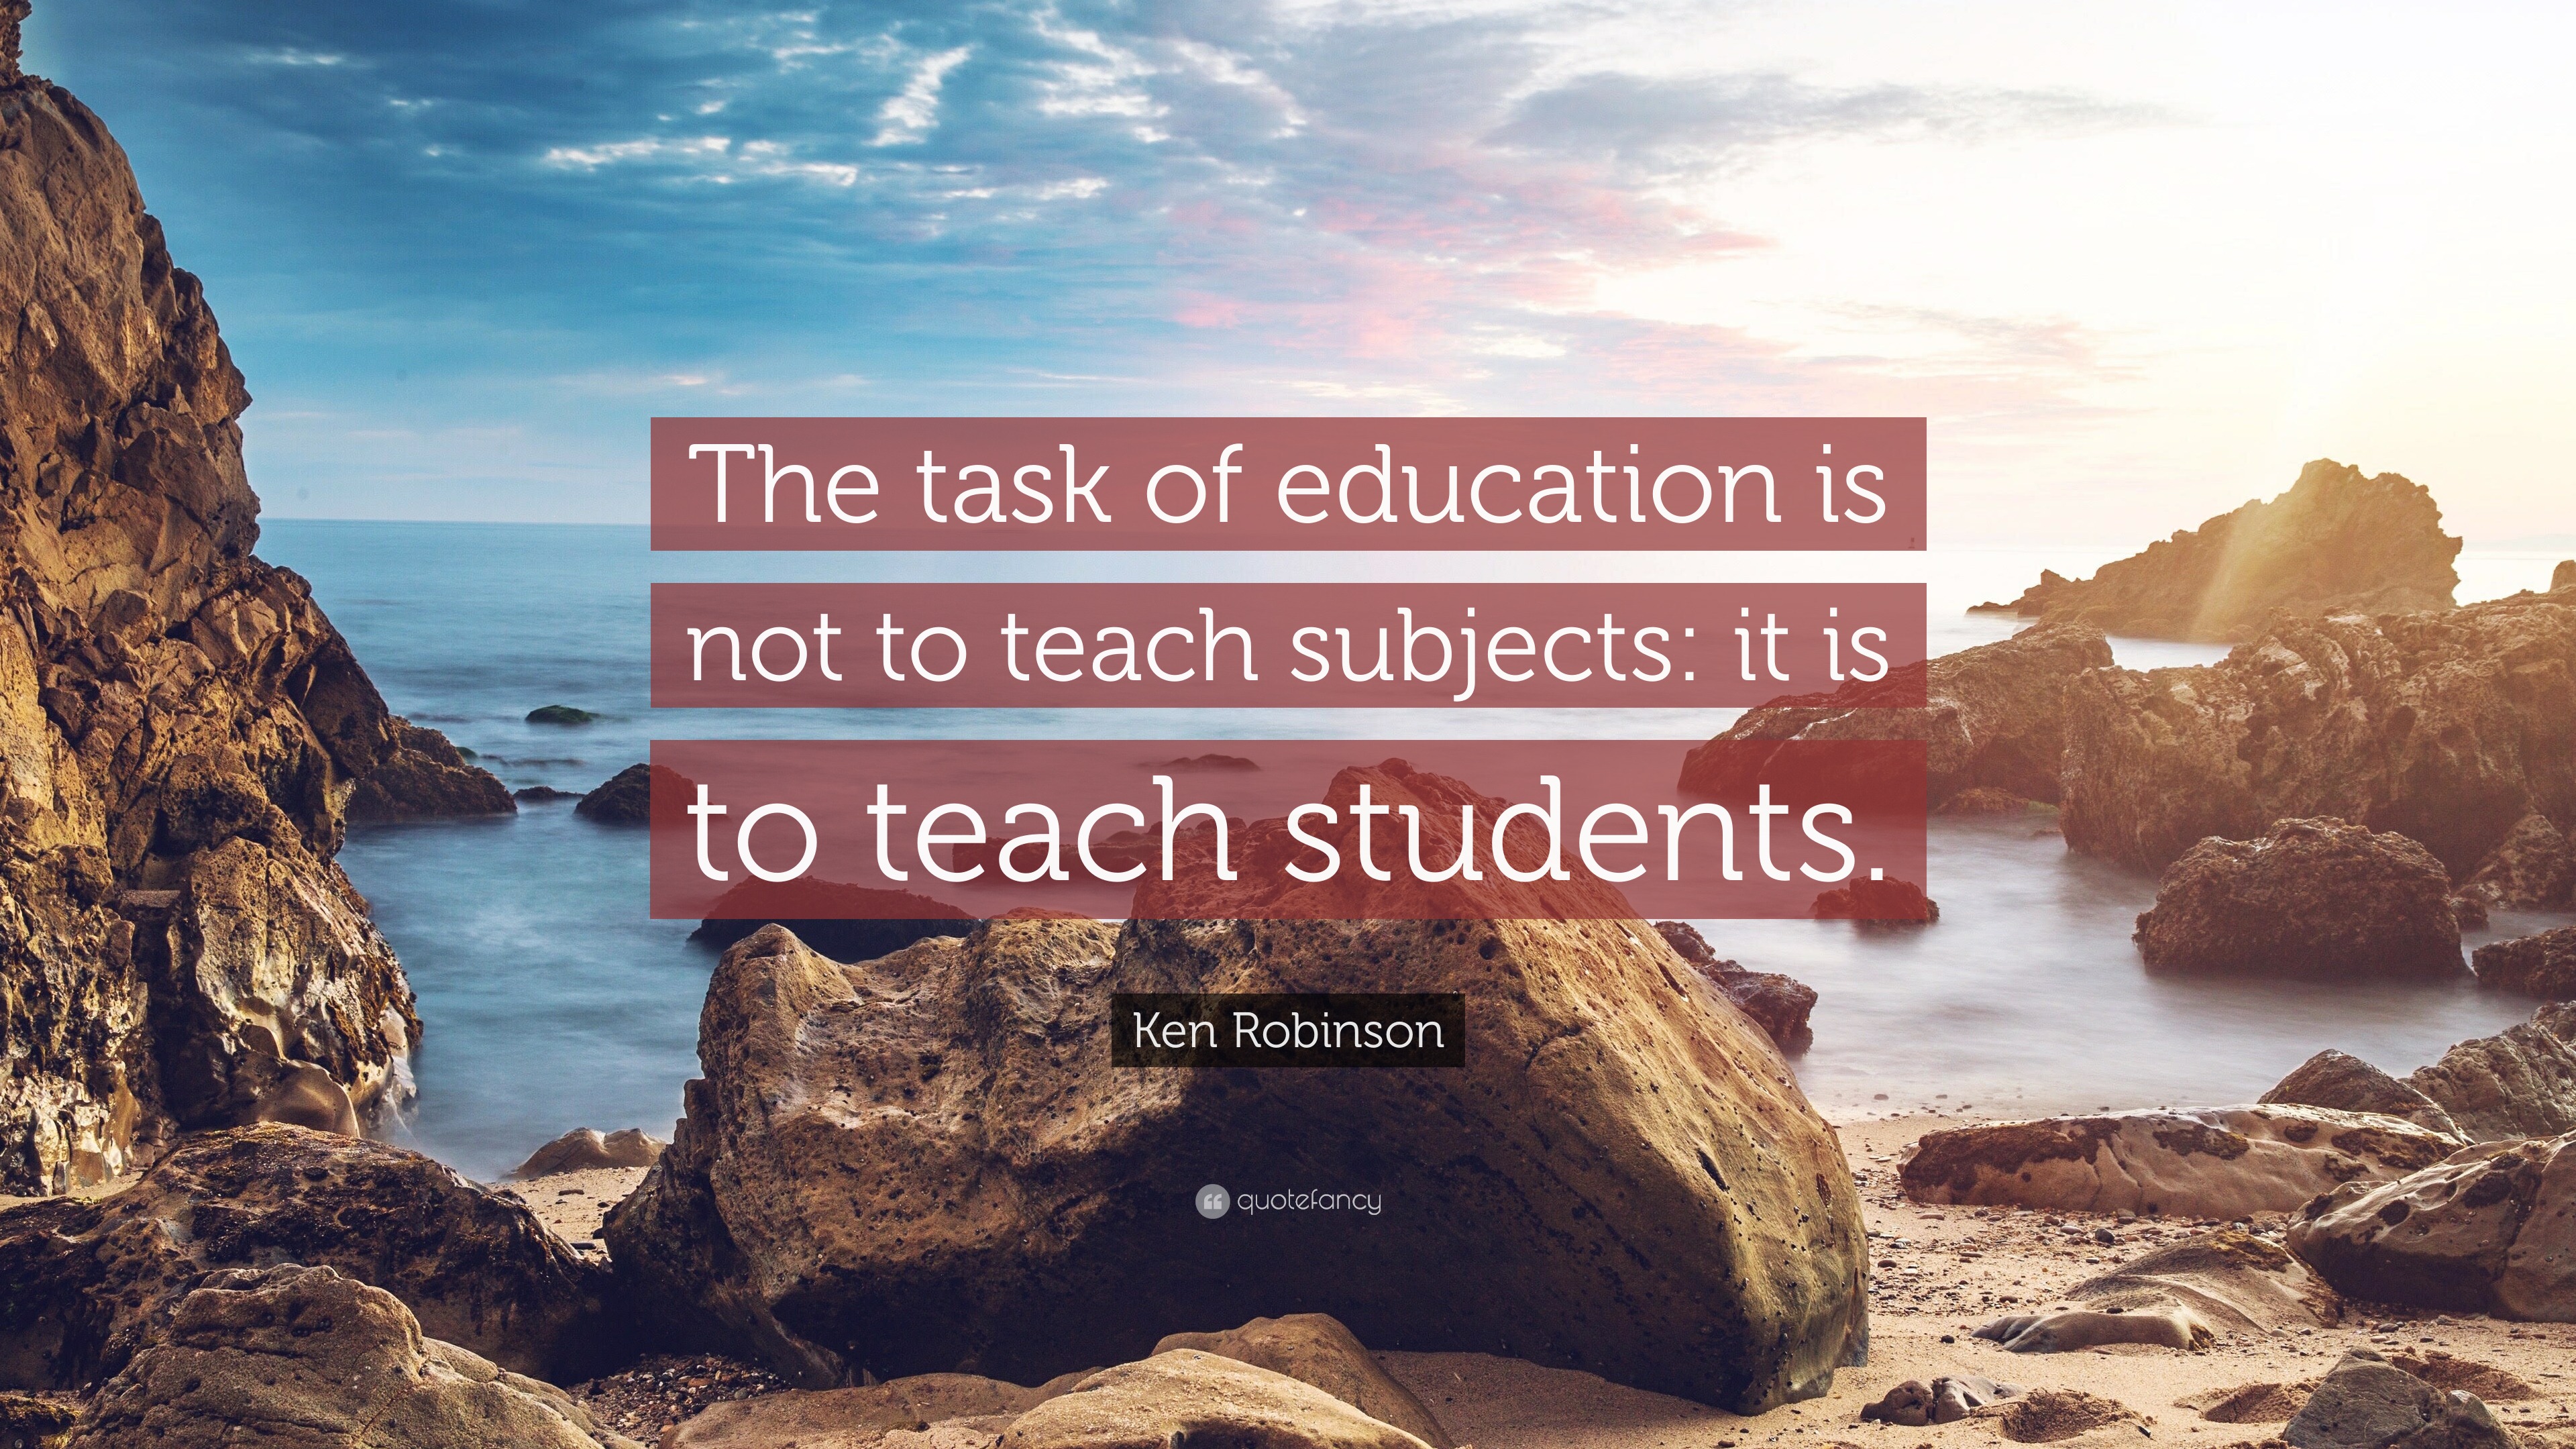 Ken Robinson Quote: “The task of education is not to teach subjects: it ...